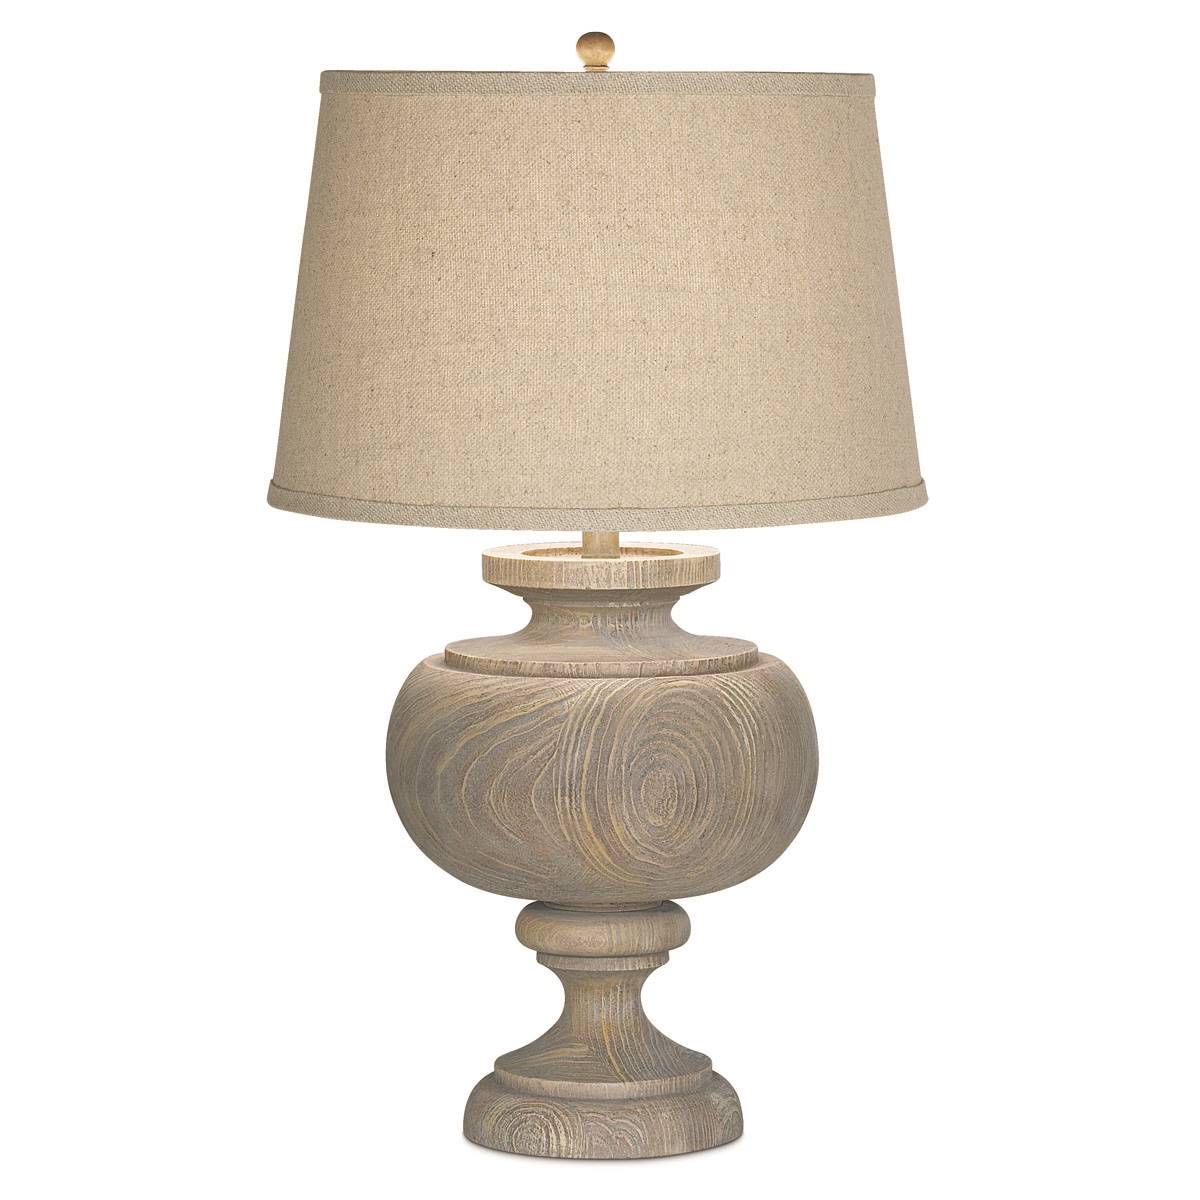 Pacific Coast Lighting Grand Maison 30in. Woodland Table Lamp